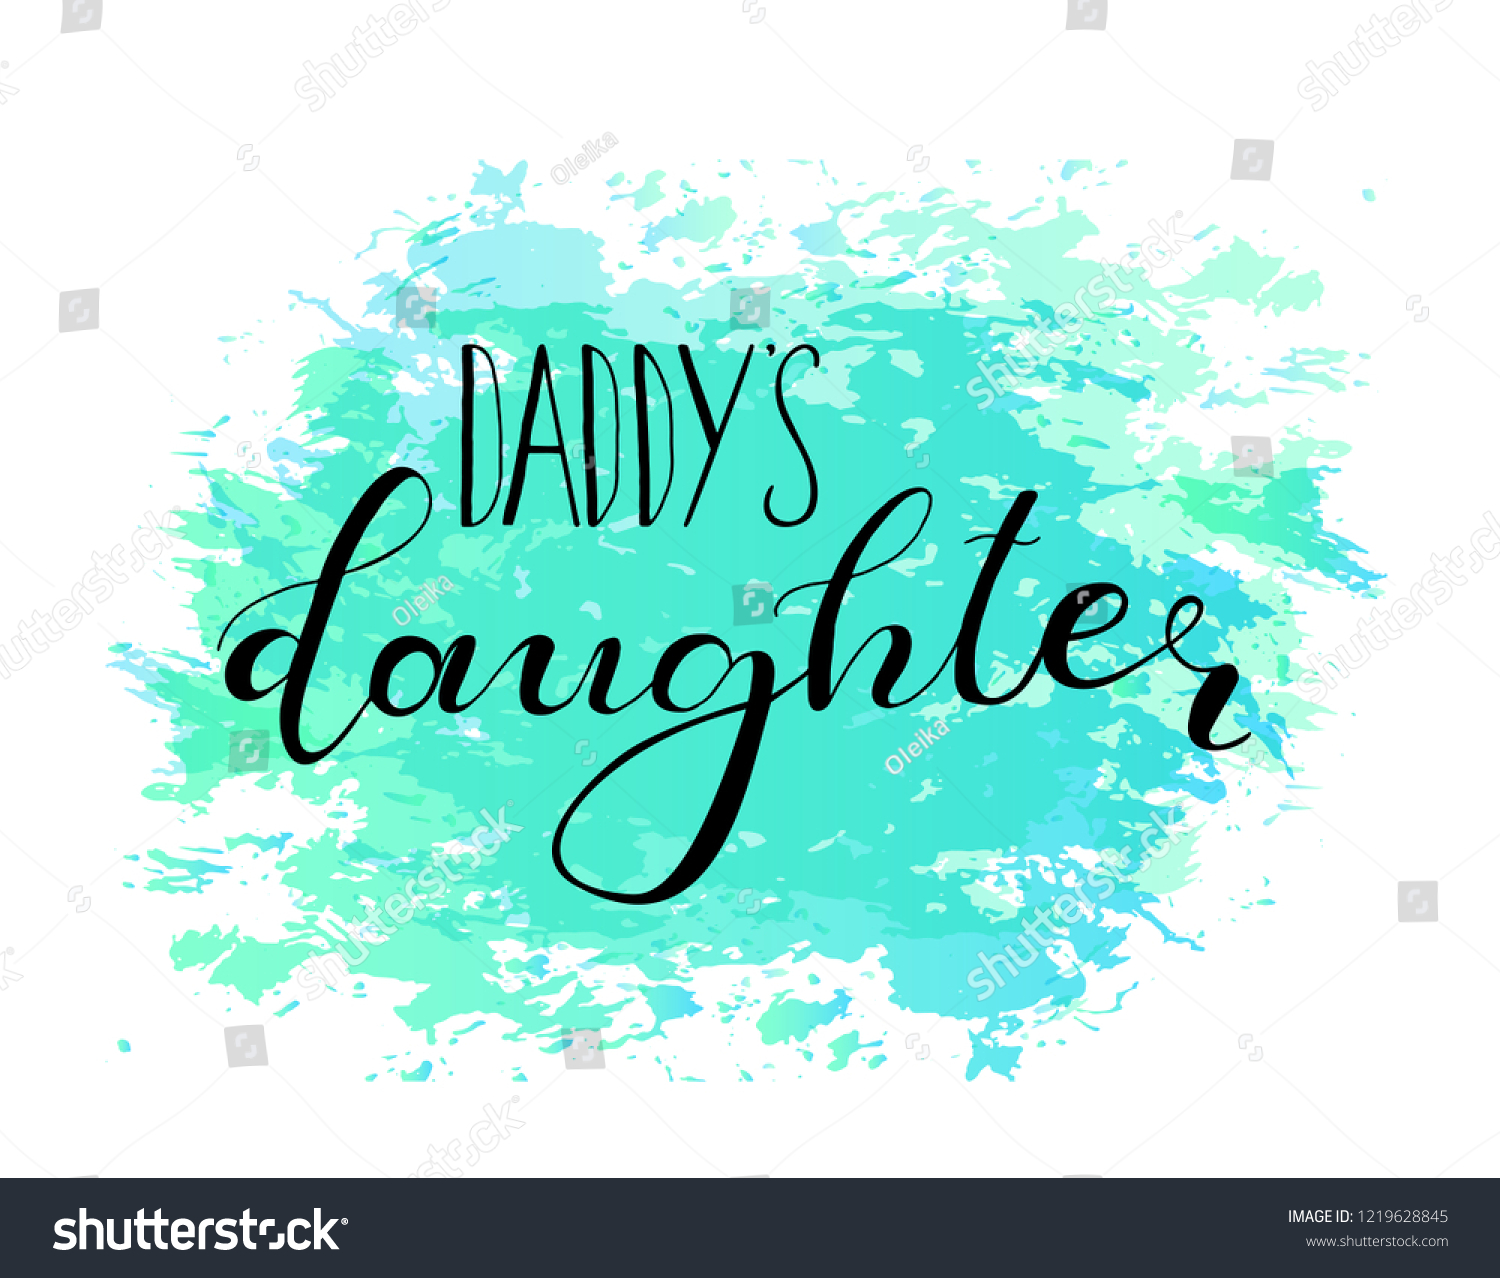 daddy daughter baby clothes